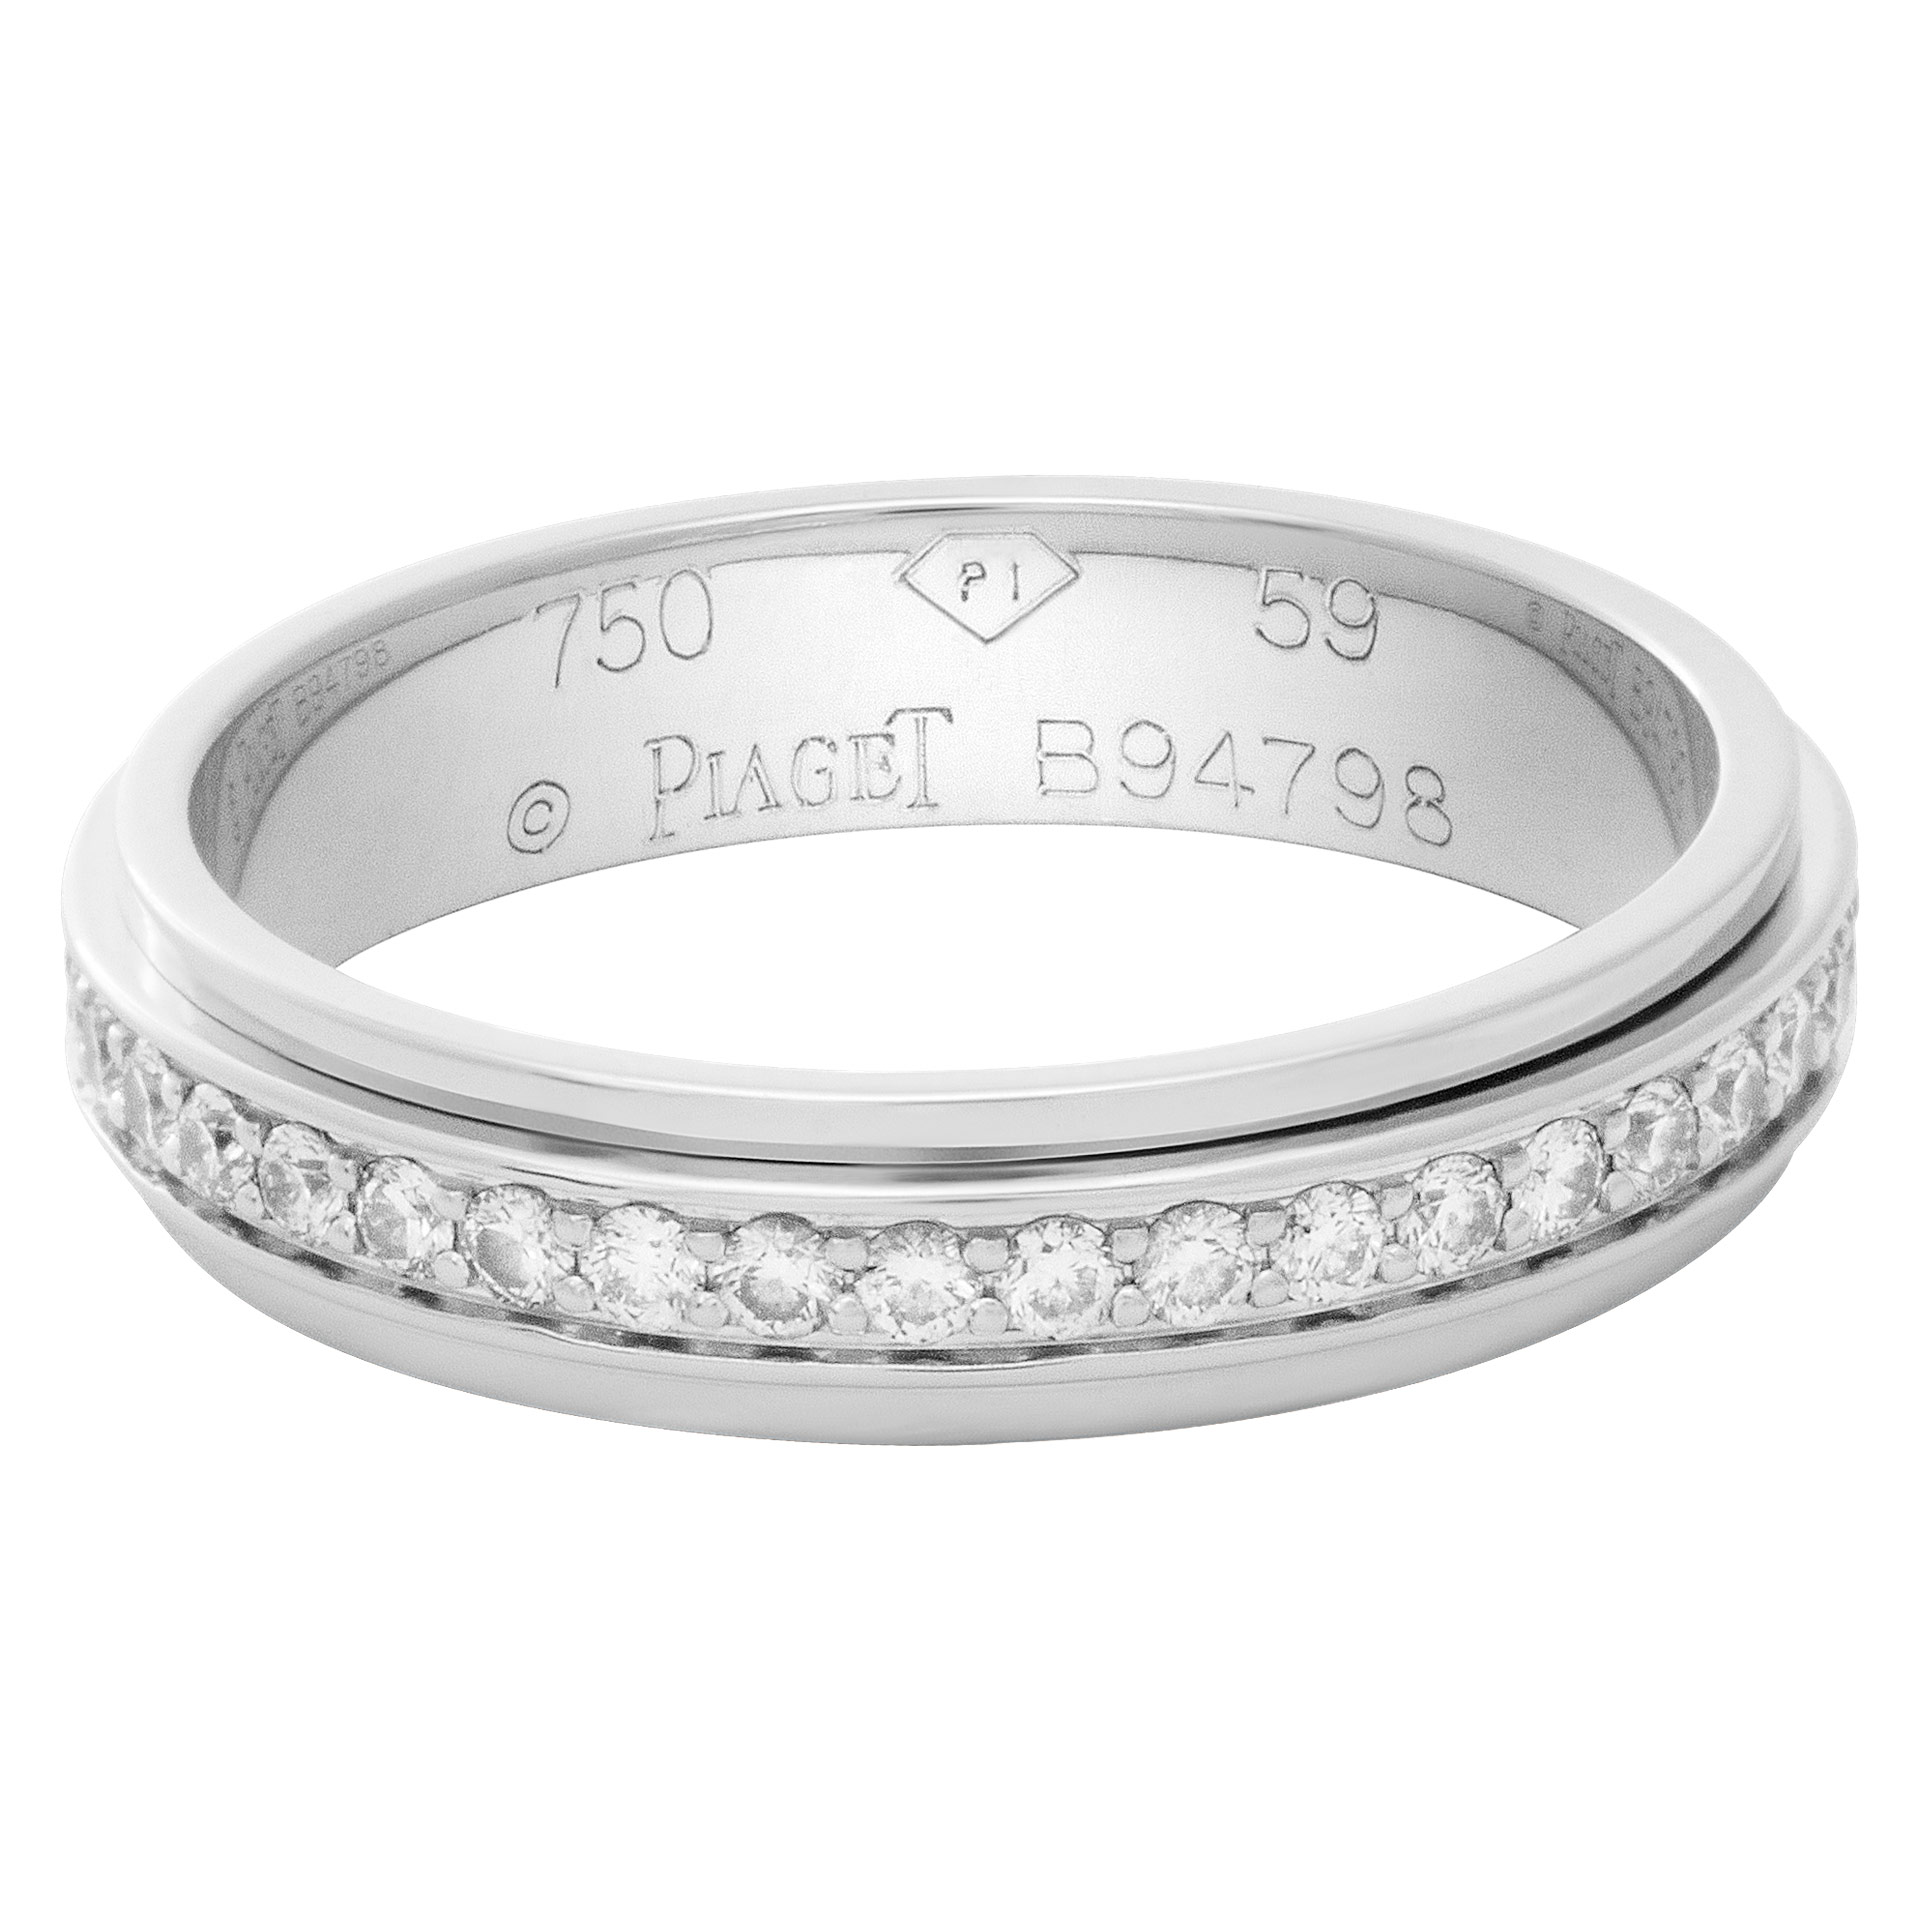 Piaget Diamond eternity Band and Ring 18k white gold. 1.00 cts in diamond. Size 8.75 image 1